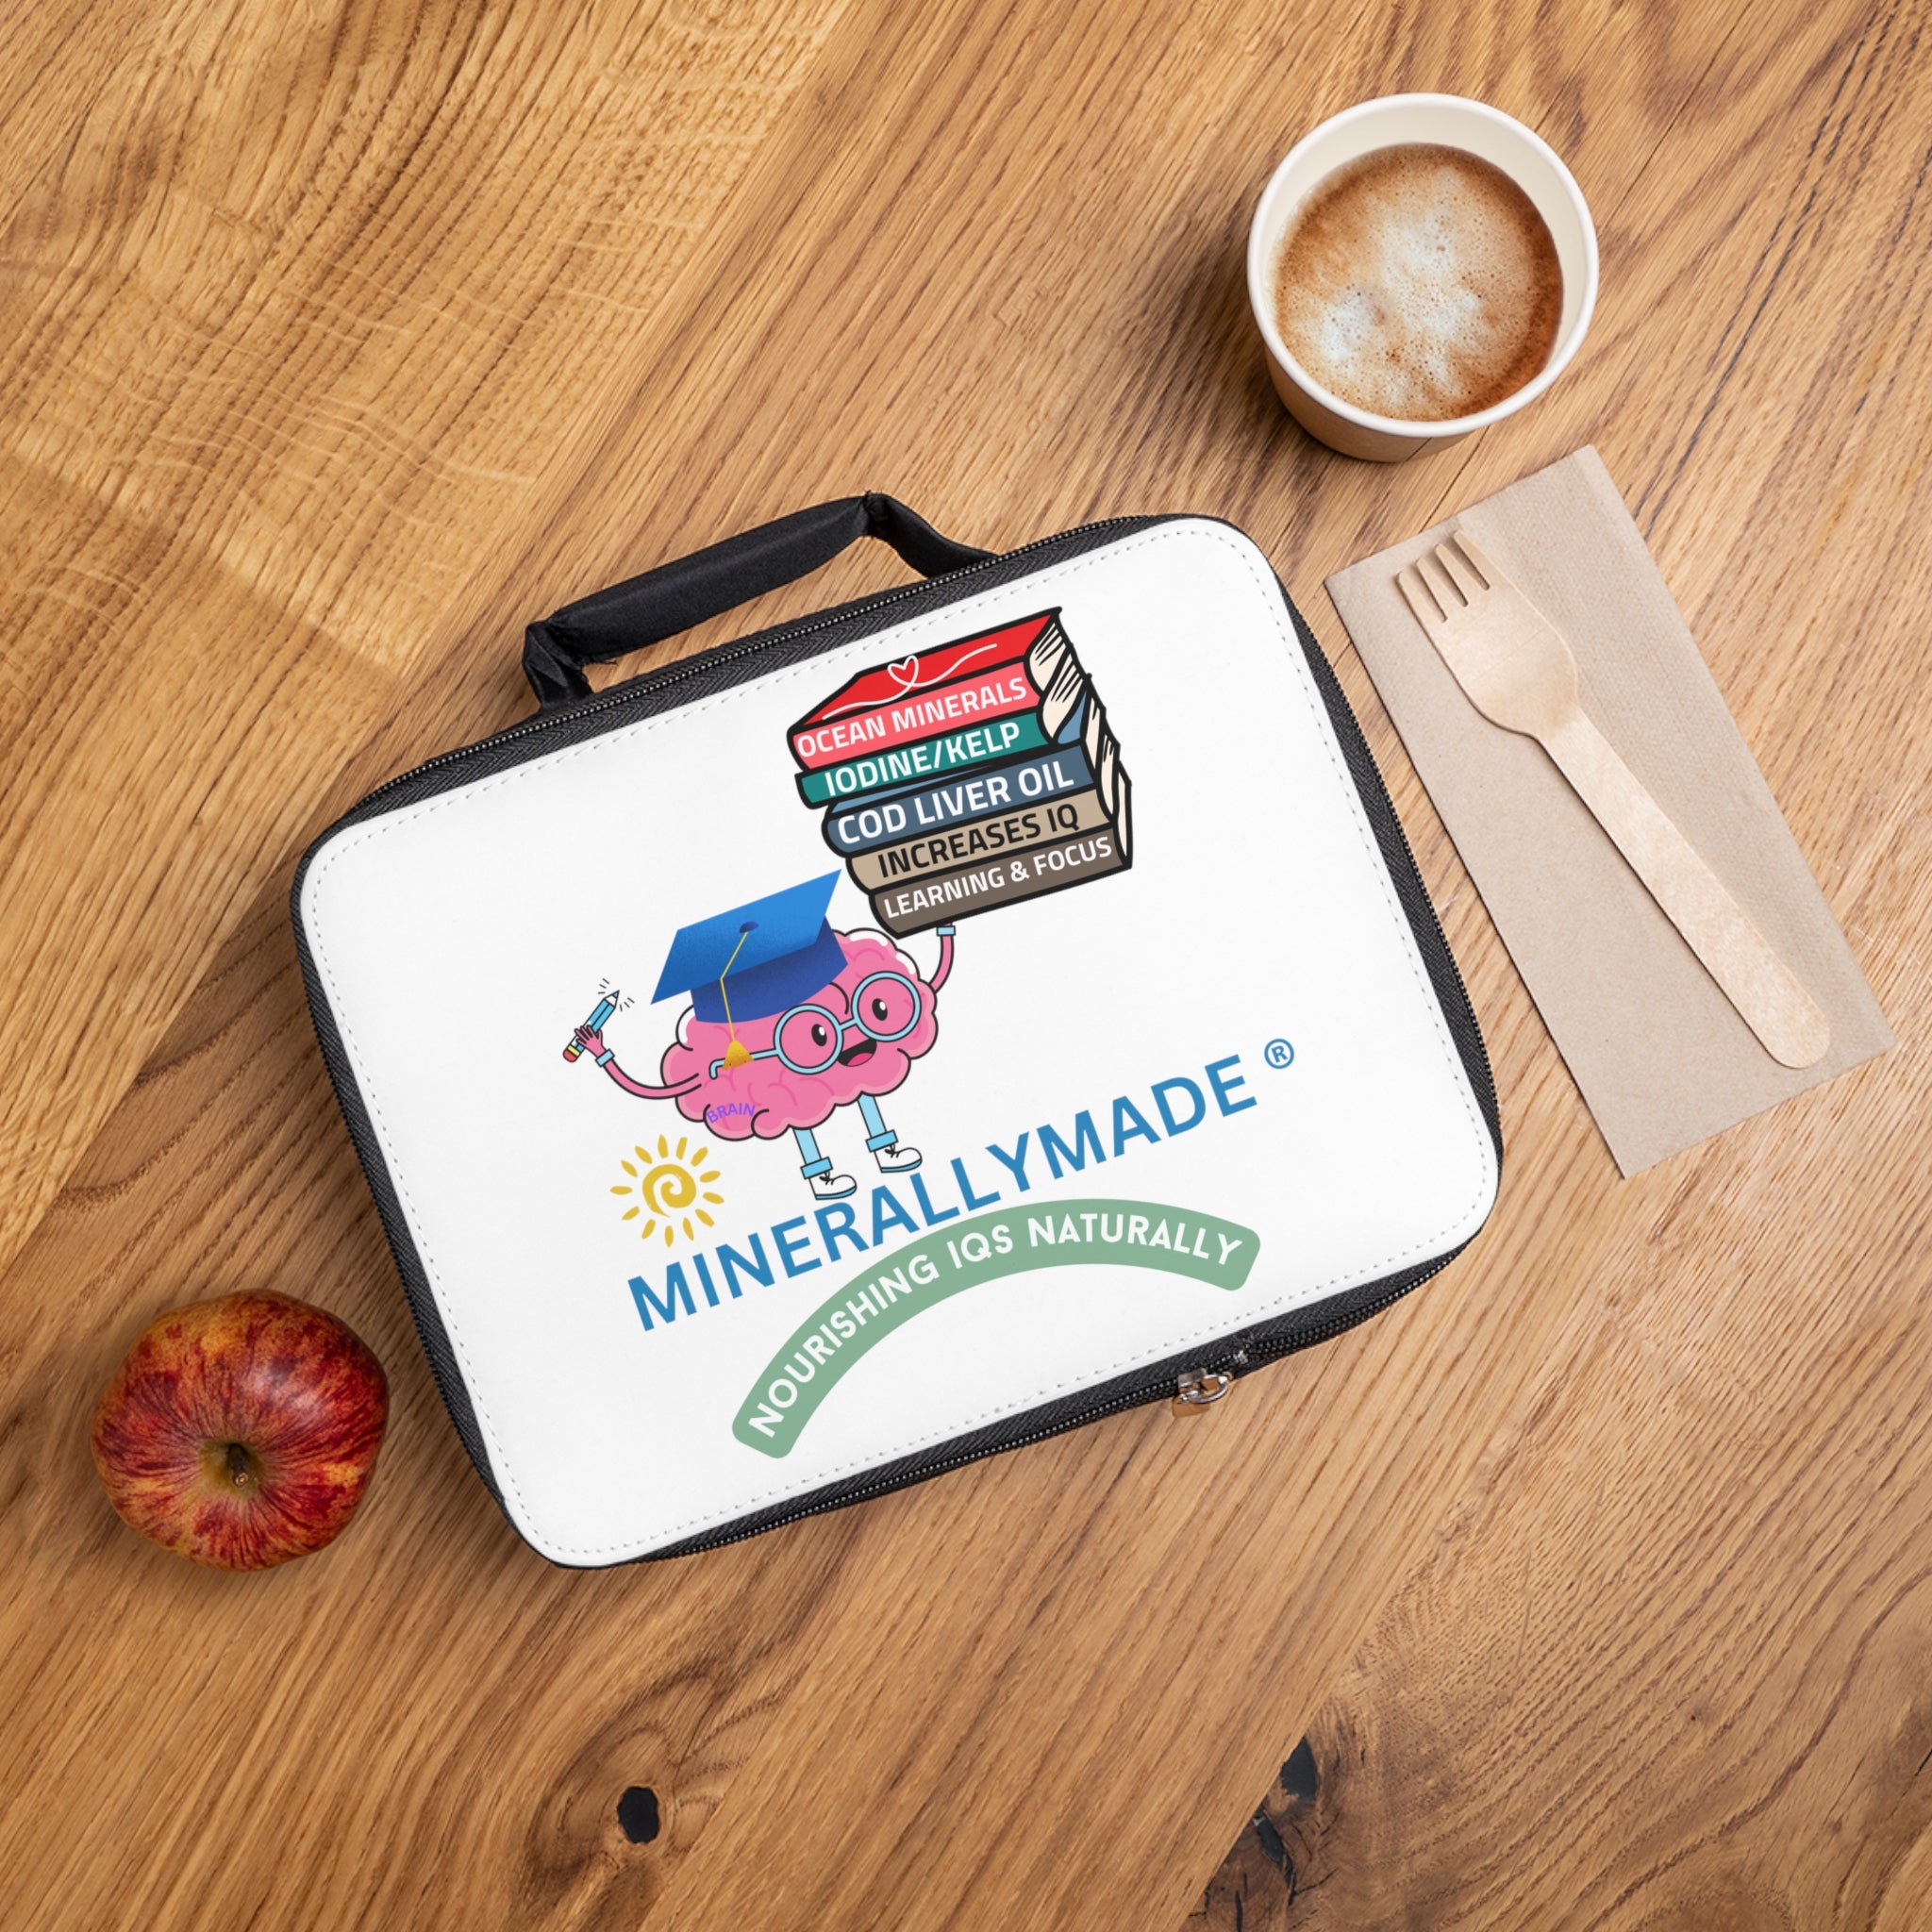 Minerallymade | Nourishing IQs Naturally | Lunch Bag